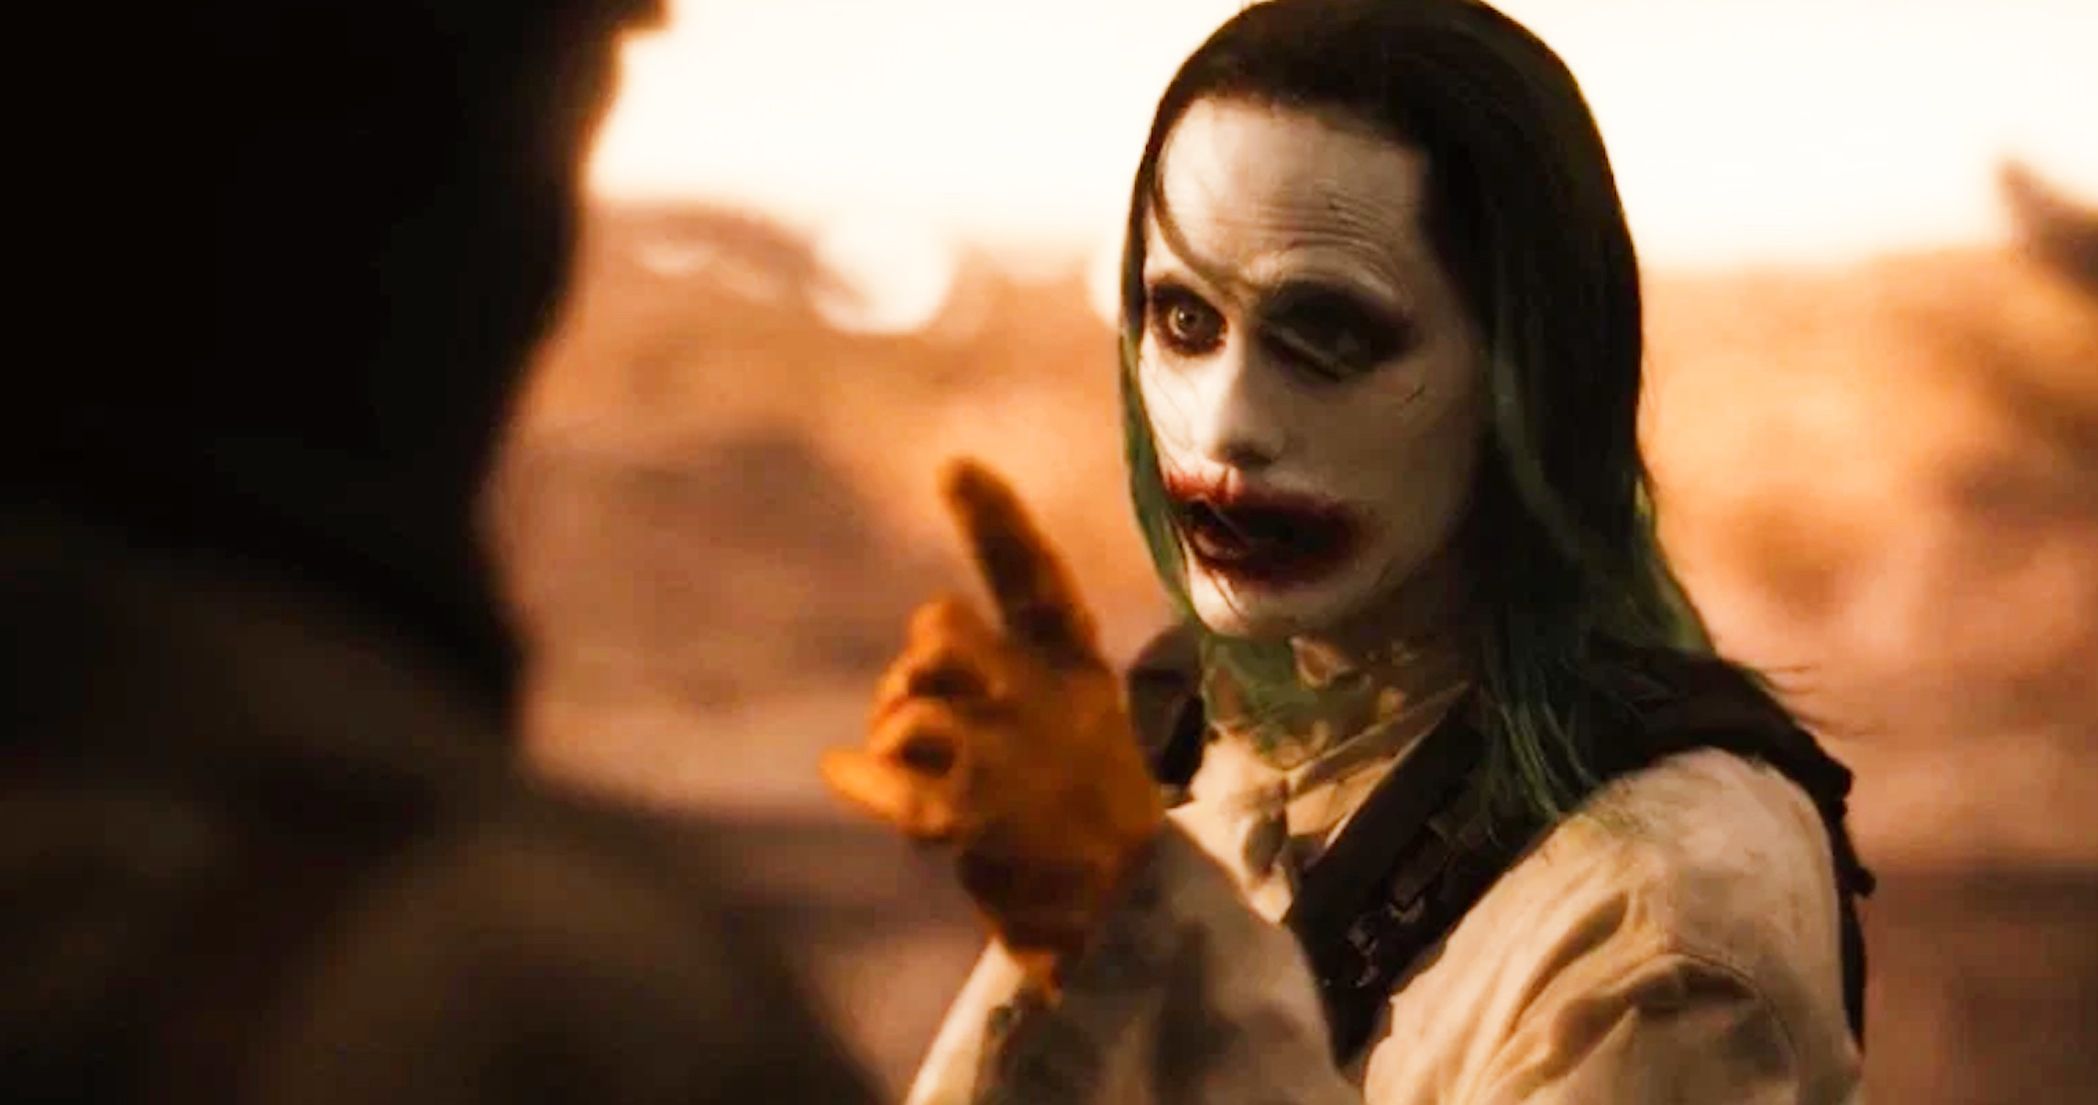 Joker's 'We Live in a Society' Line Restored in Snyder Cut Extended Deleted Scene